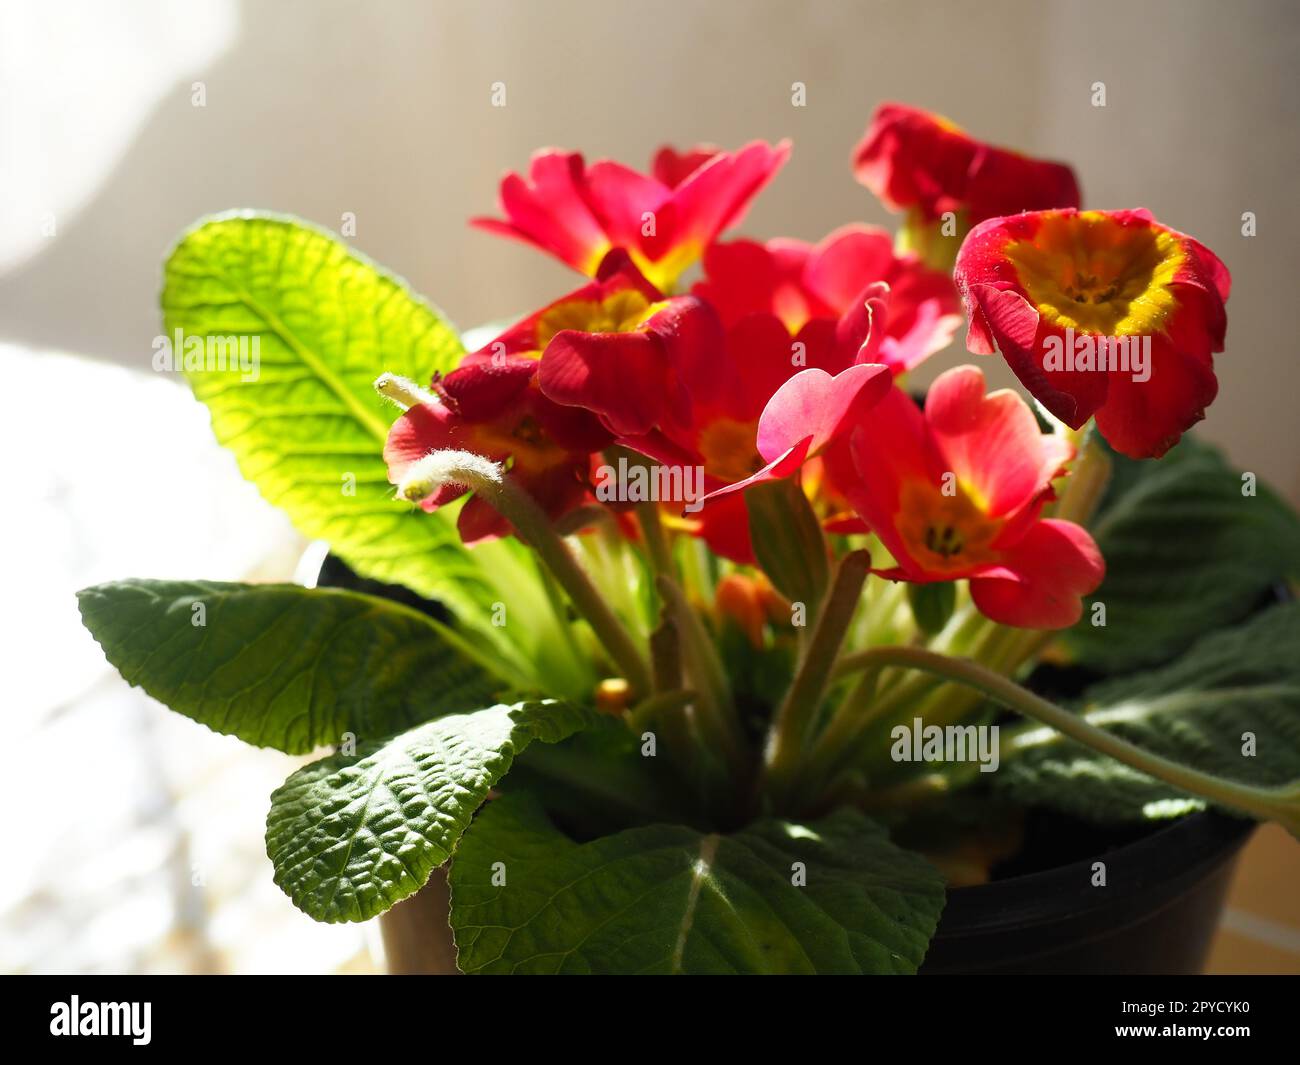 Primula, a genus of plants from the Primulaceae family of the Ericales order. Indoor floriculture as a hobby. Red bright flower with a yellow center. Stock Photo